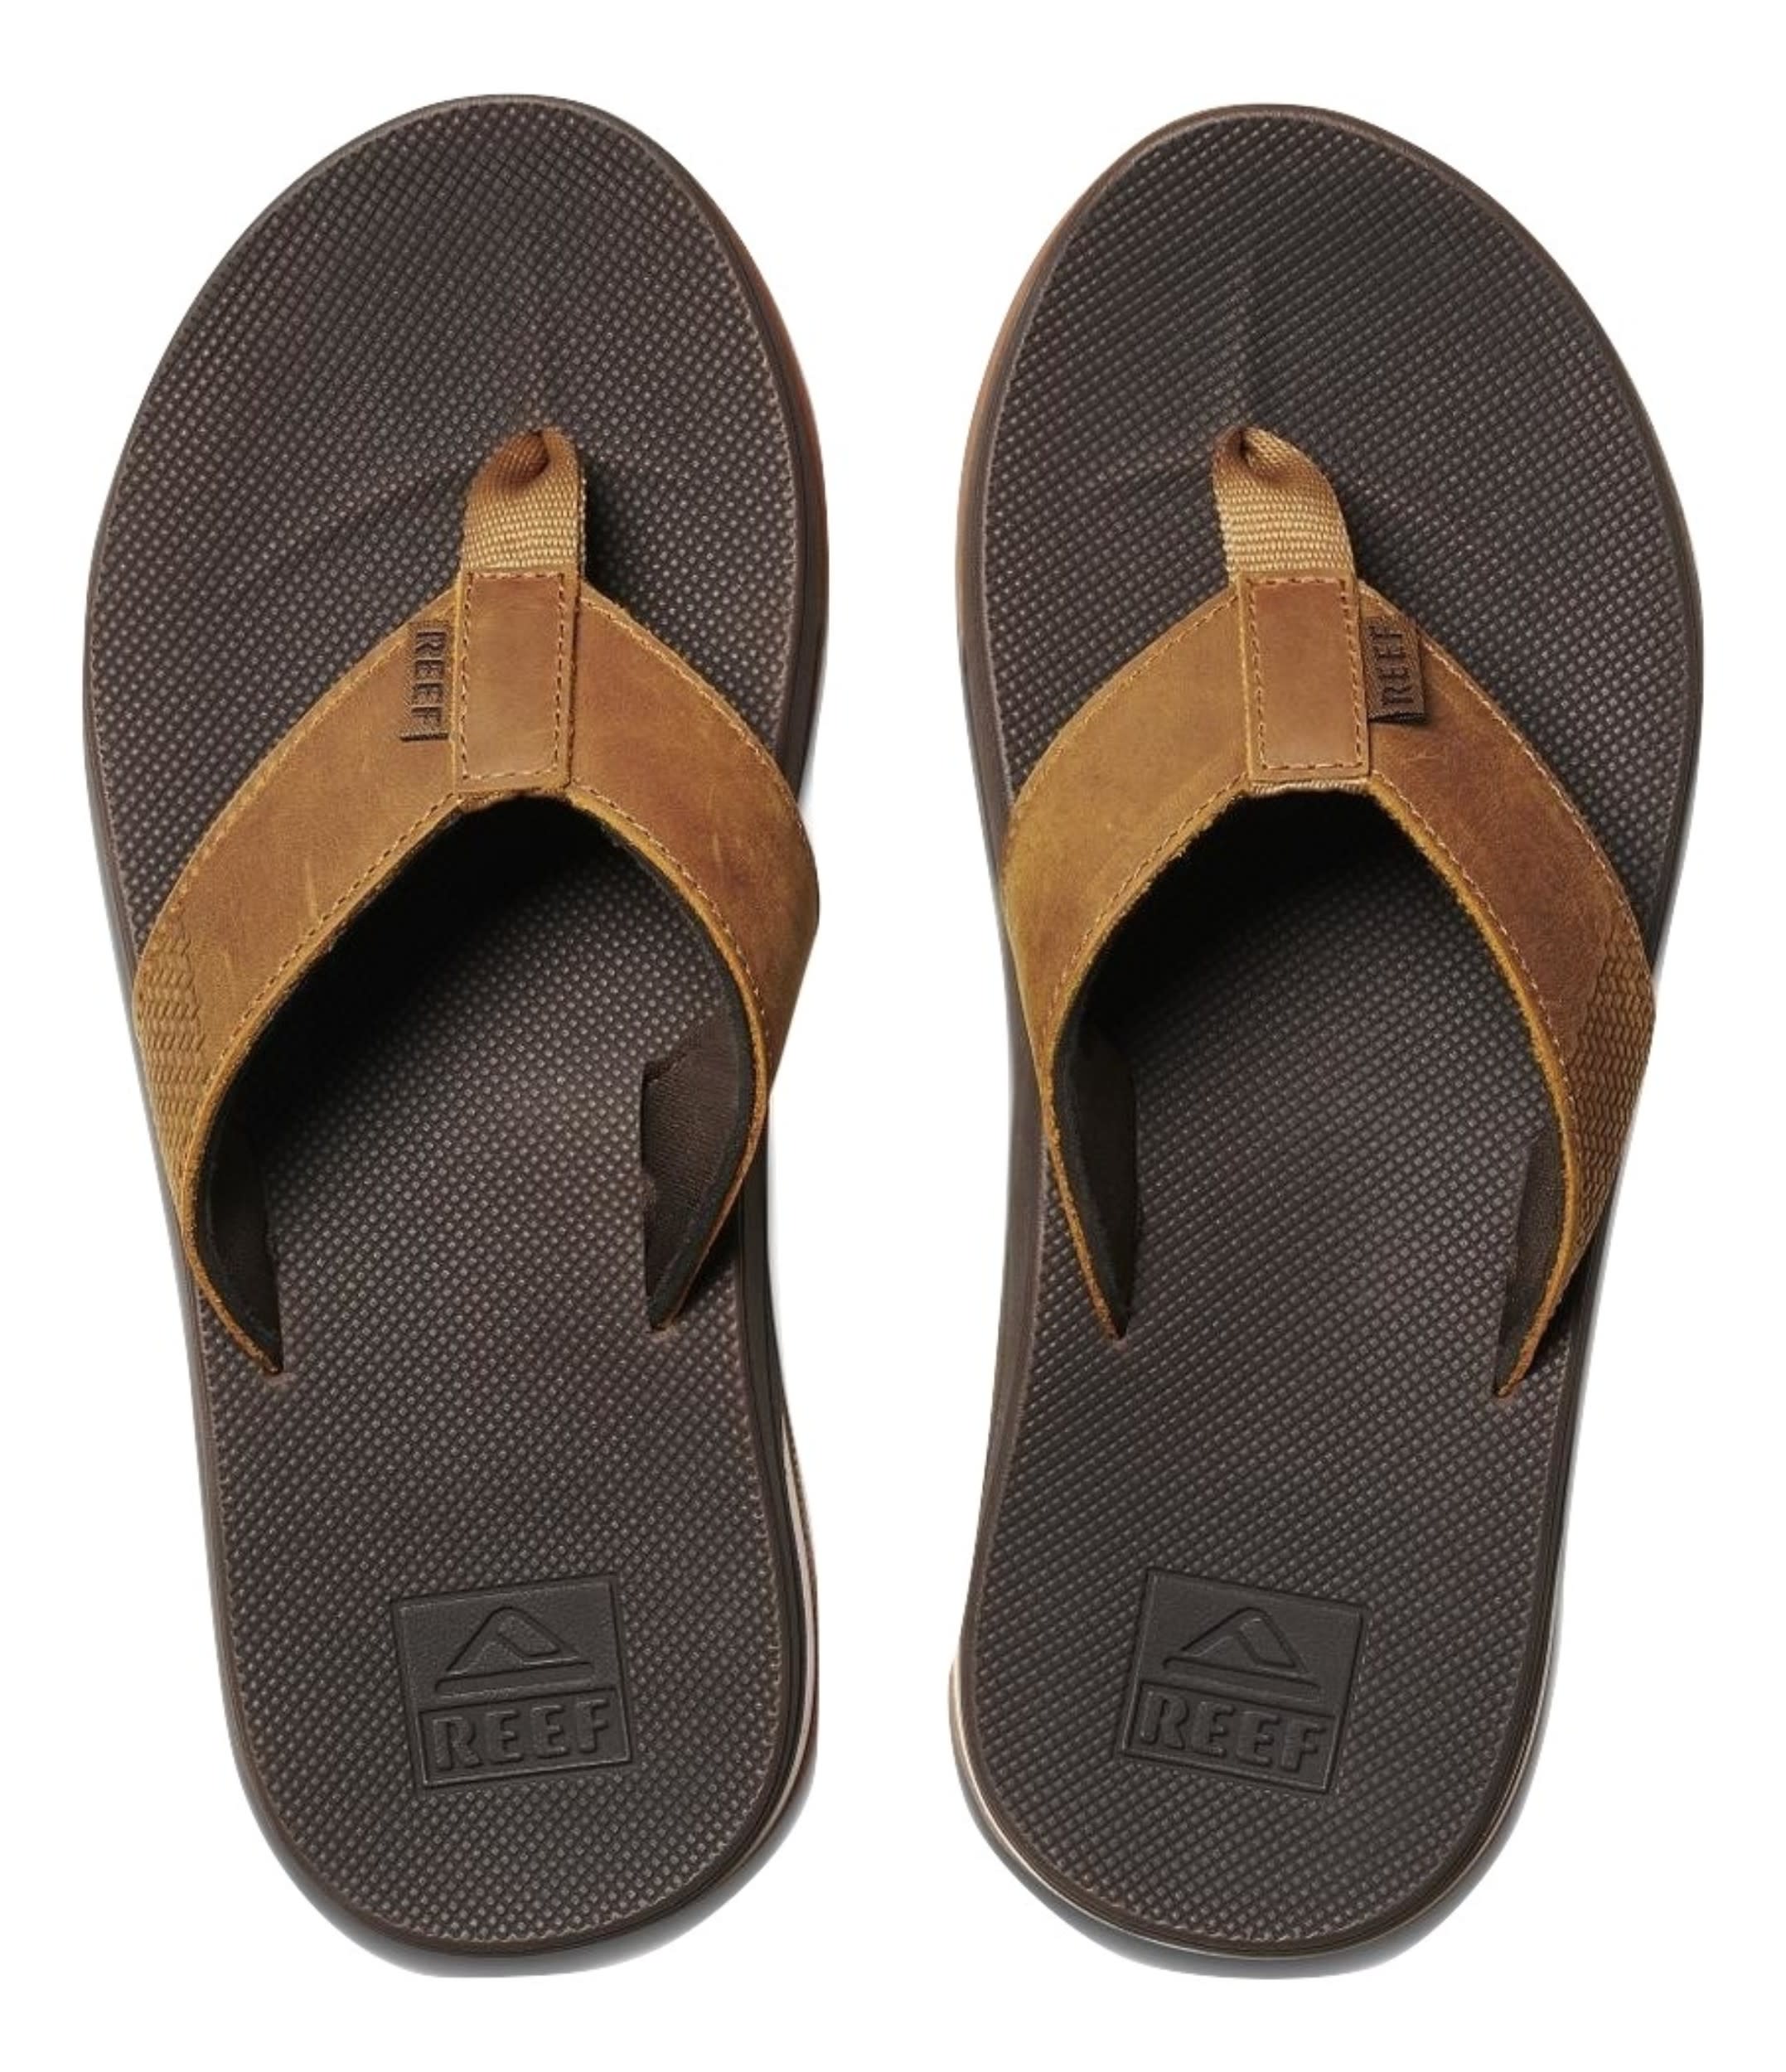 Reef Leather Fanning Low Mens Sandal